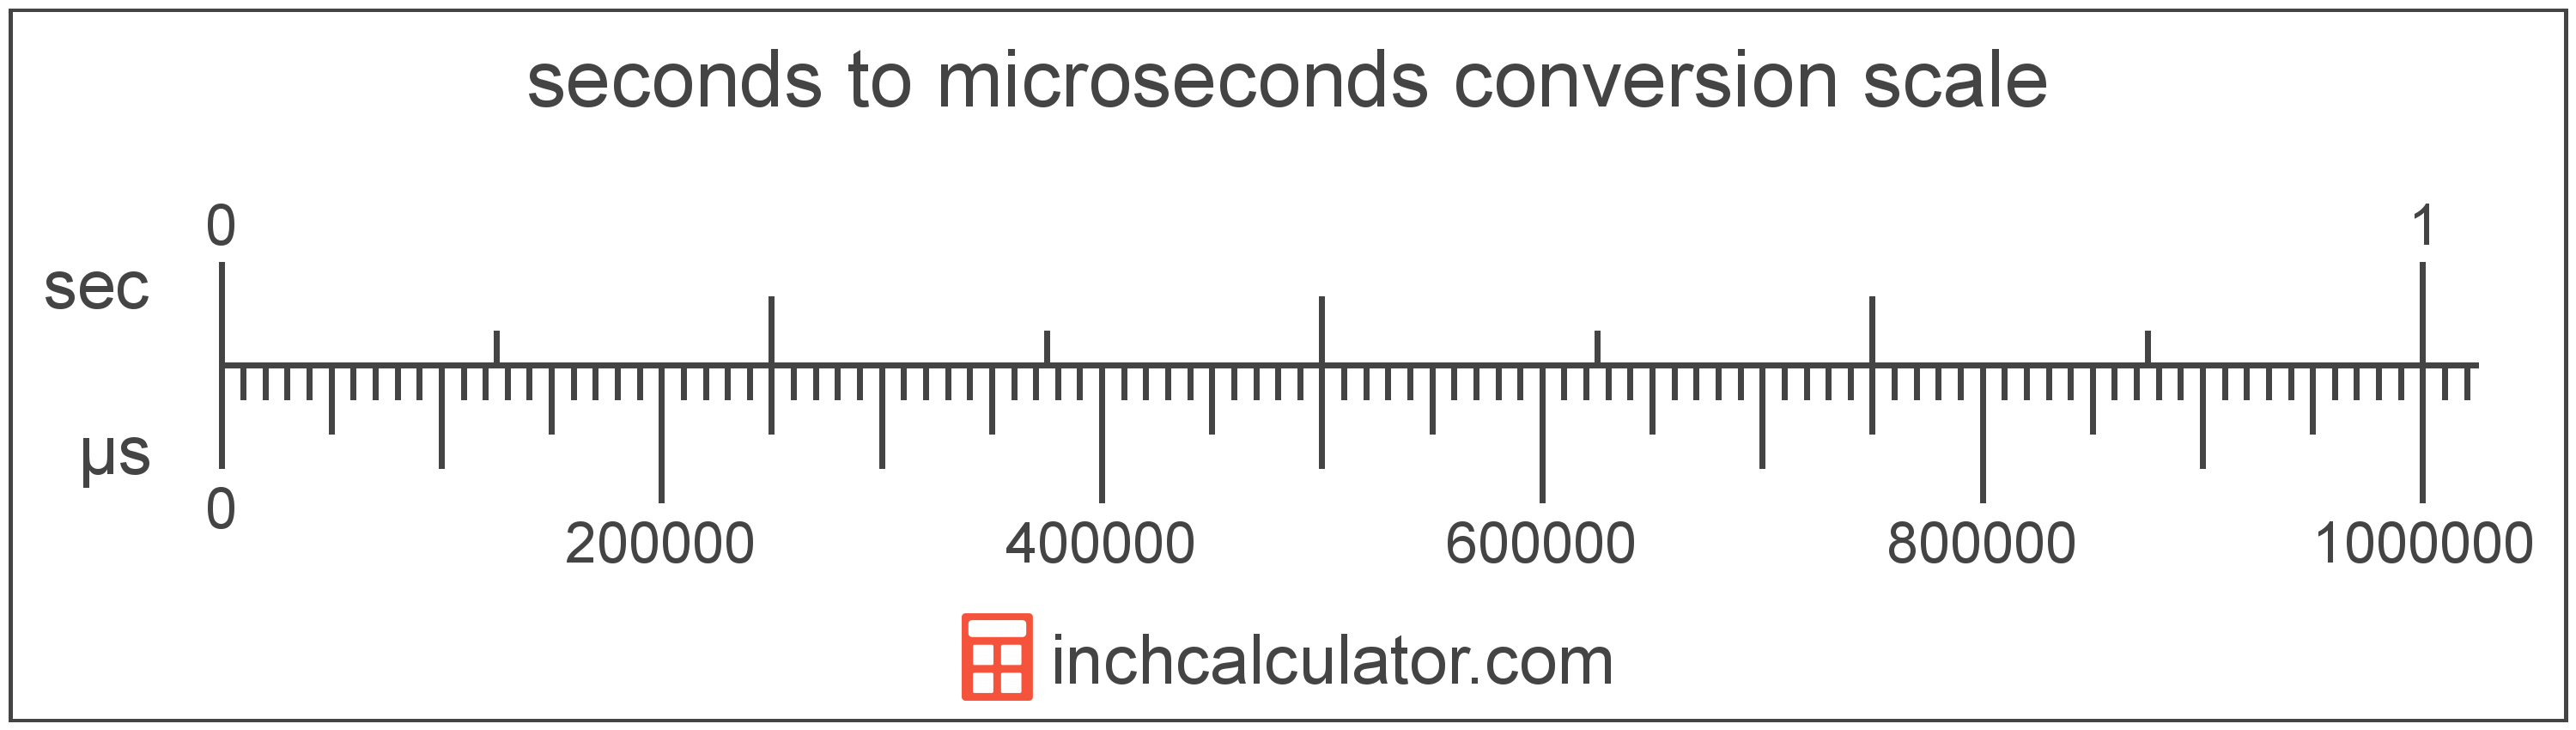 conversion scale showing microseconds and equivalent seconds time values